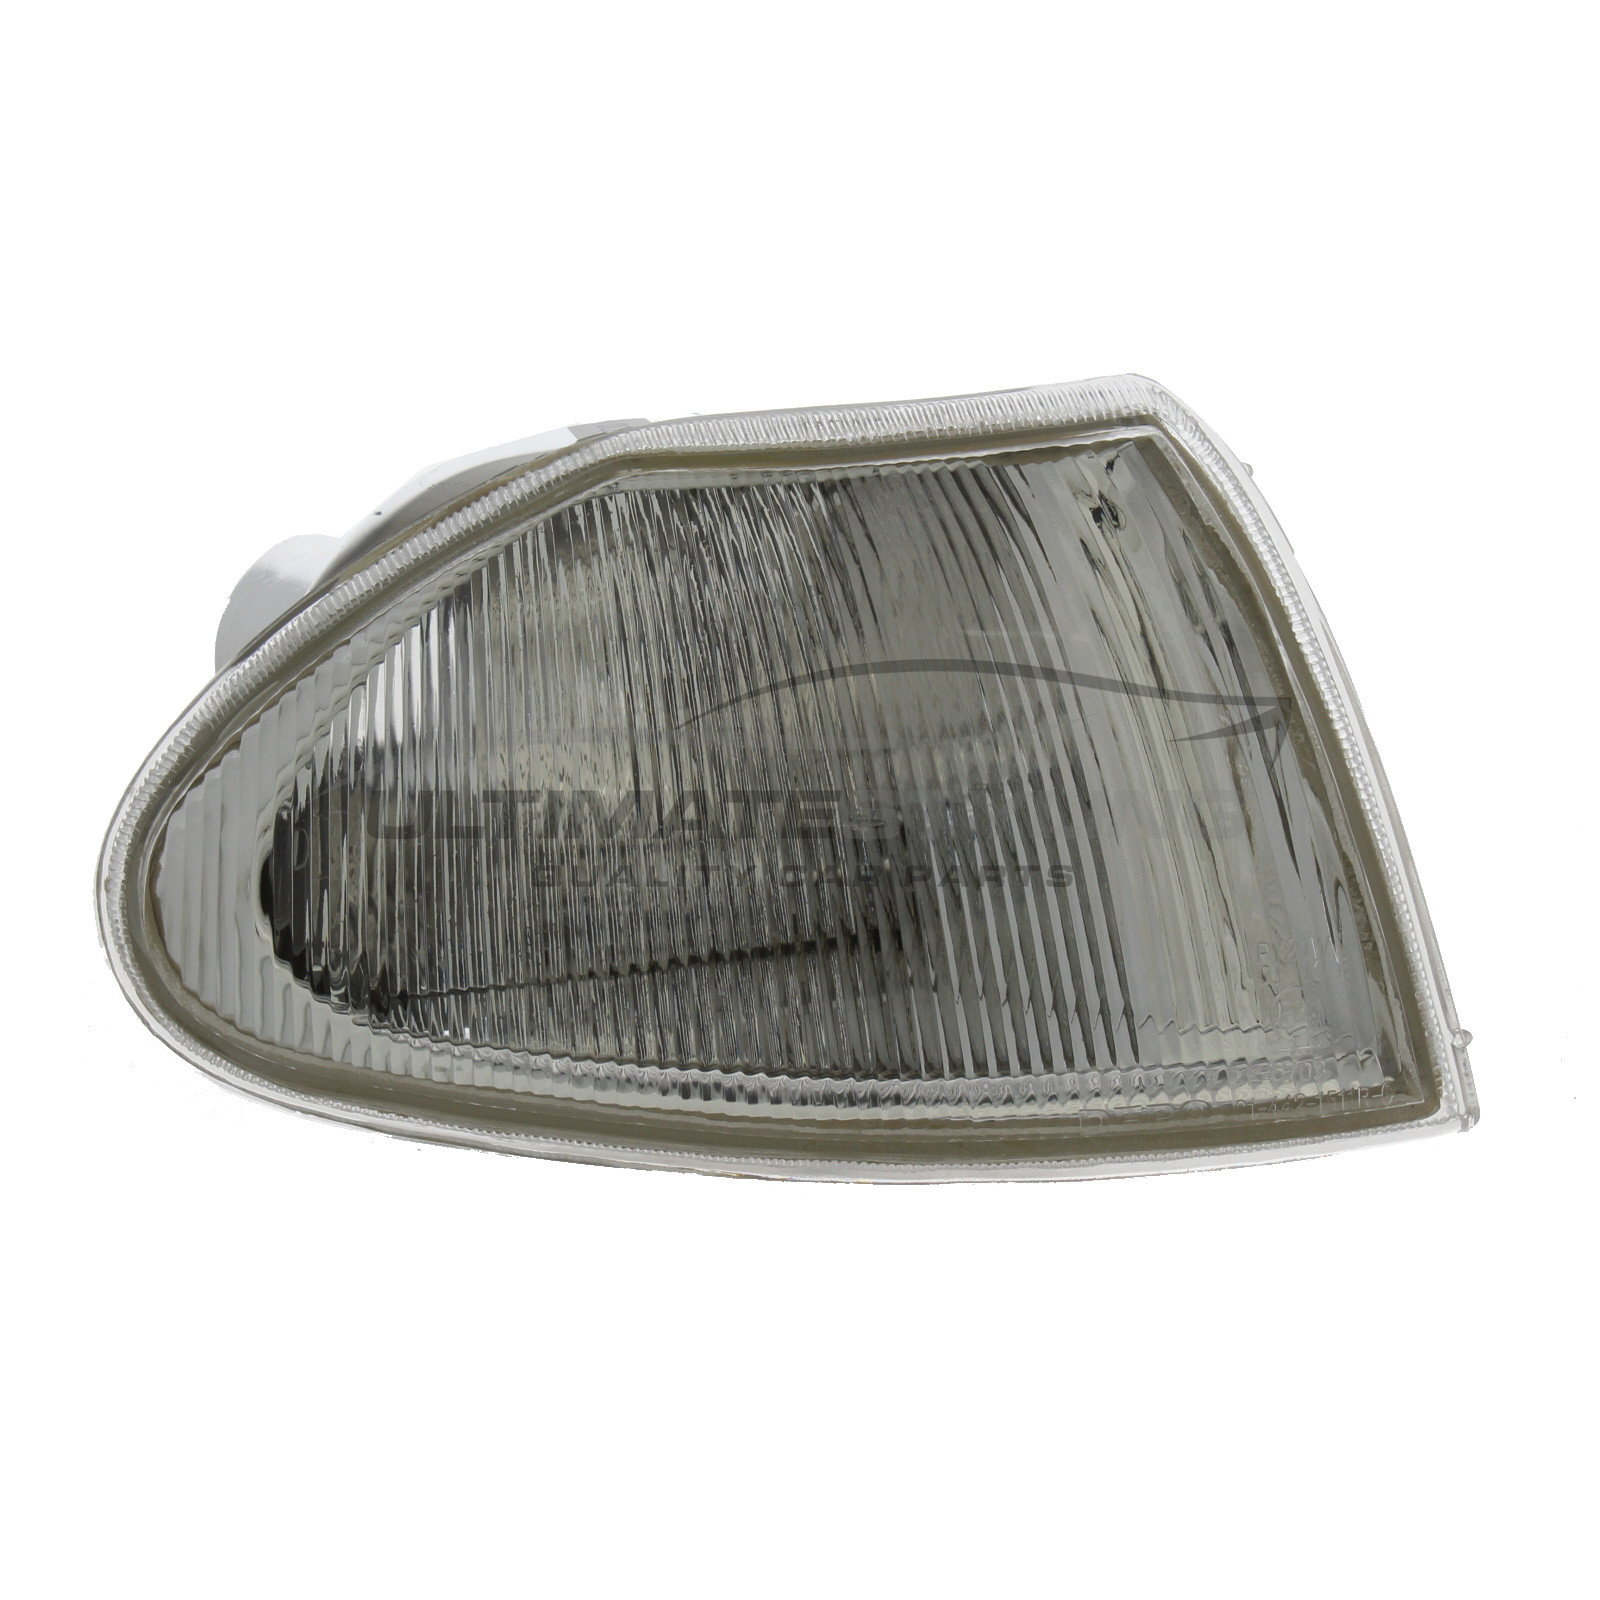 Vauxhall Astra 1994-1998 Clear Front Indicator Excludes Bulb Holder - Drivers Side (RH)